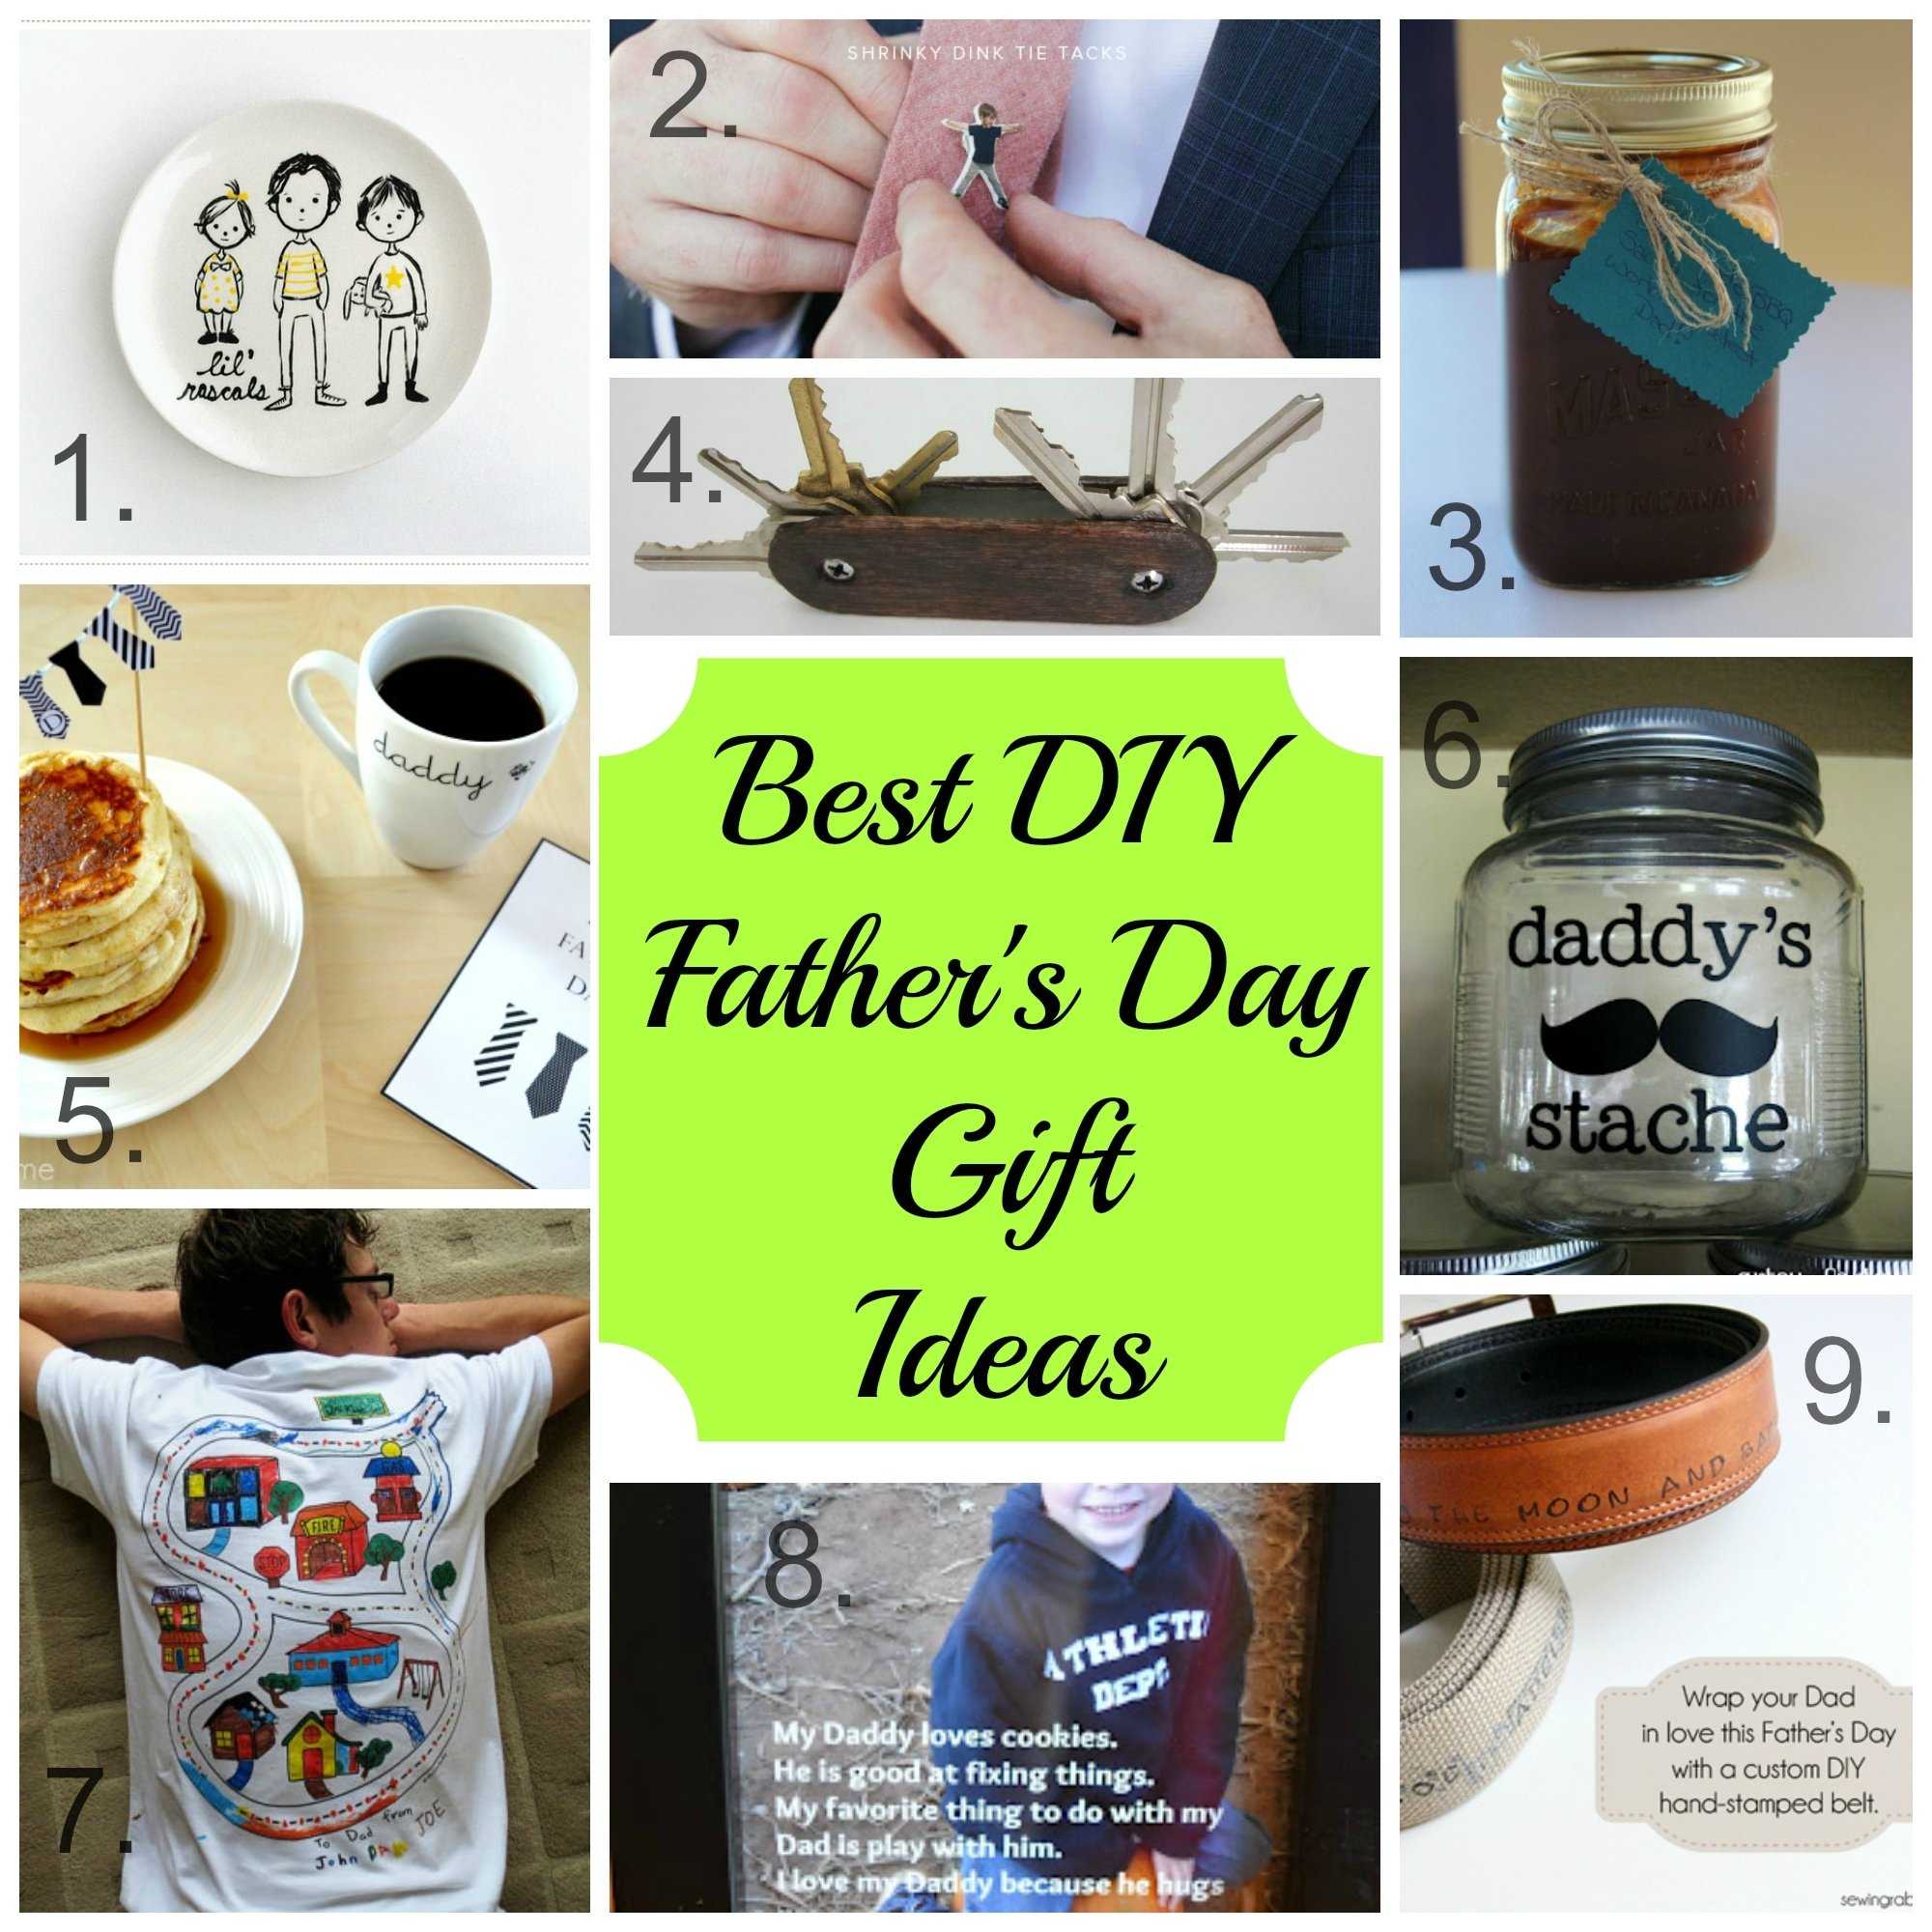 10 Gorgeous Ideas For Fathers Day Gifts best diy fathers day gift ideas adventures of an orthodox mom 8 2023